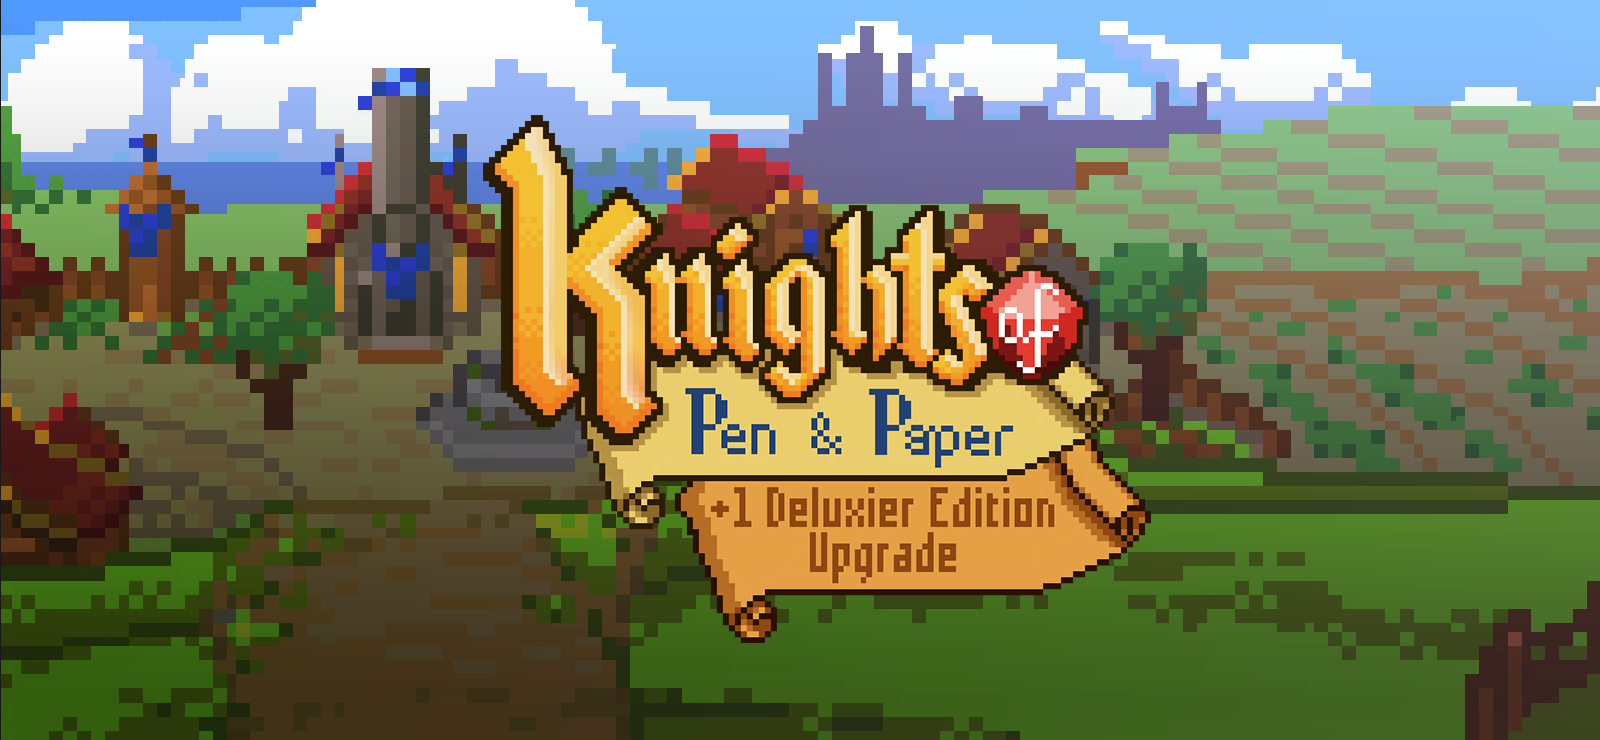 Knights Of Pen And Paper +1 Deluxier Edition Upgrade